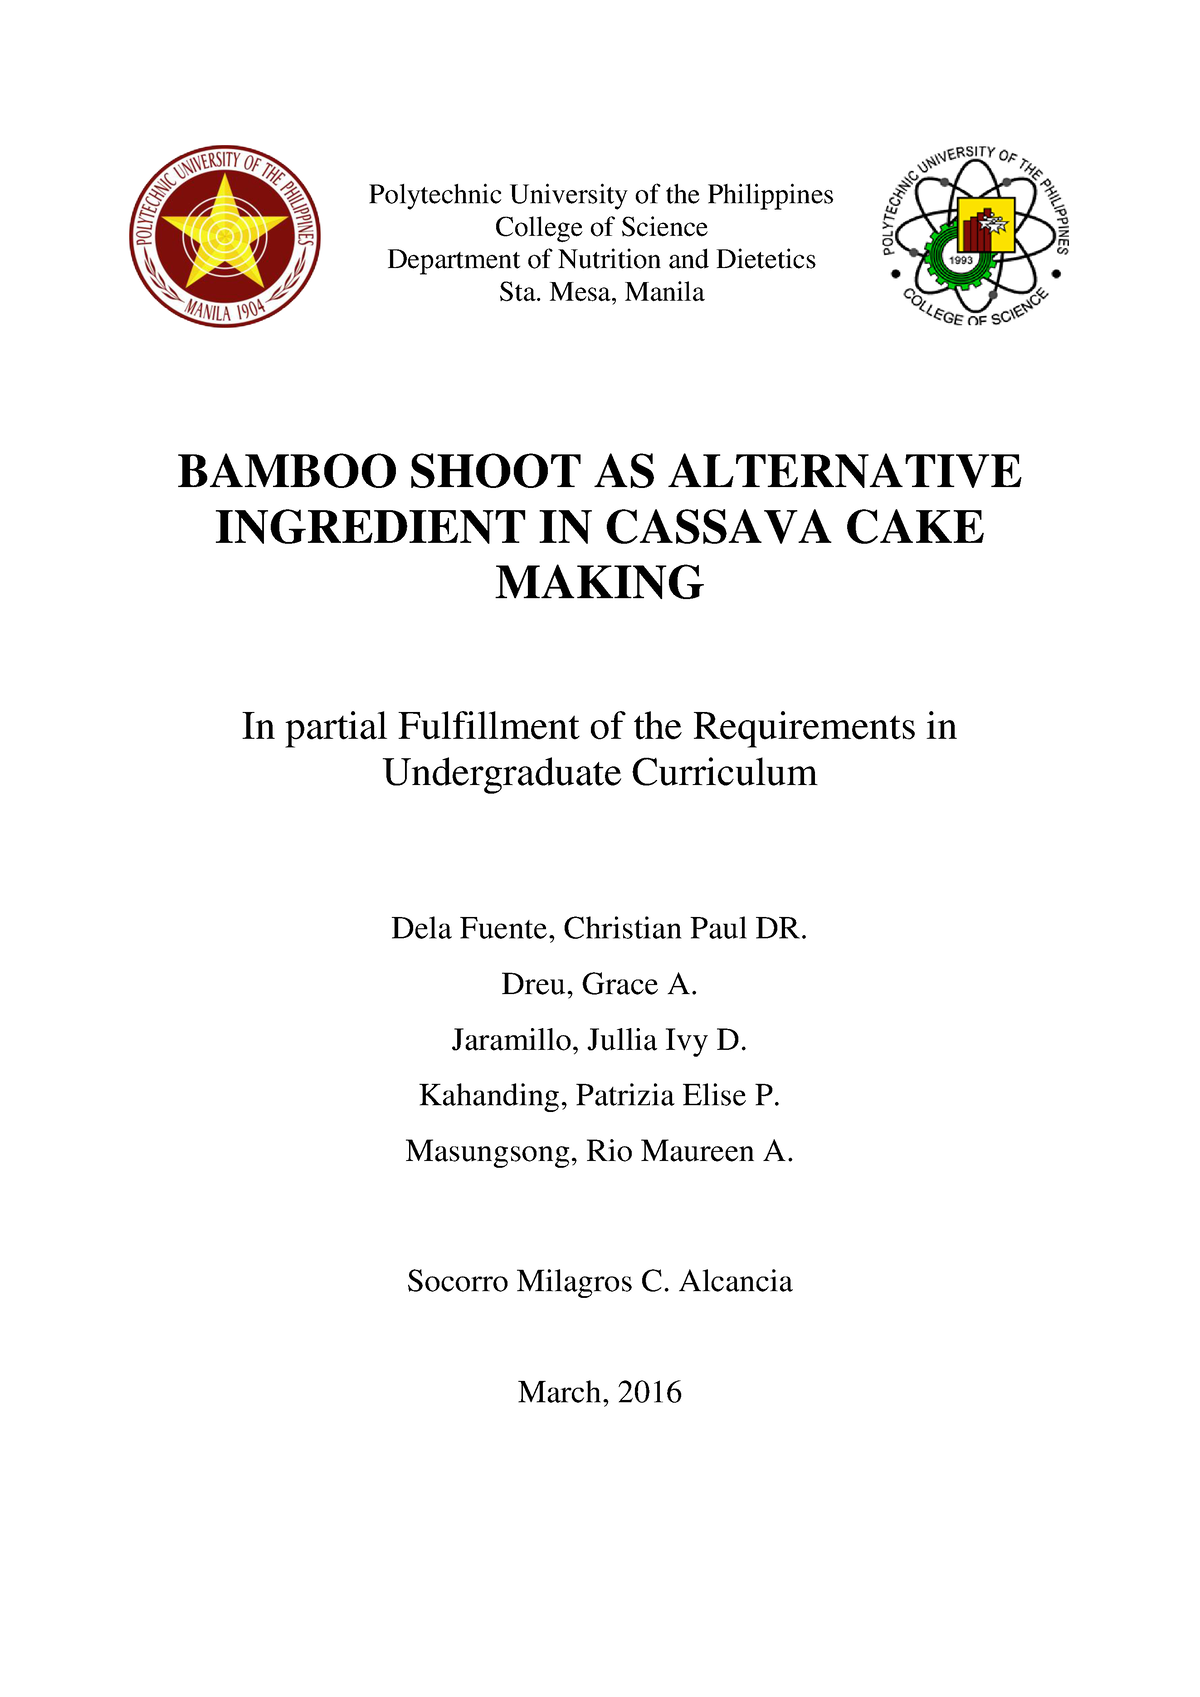 thesis about bamboo shoot